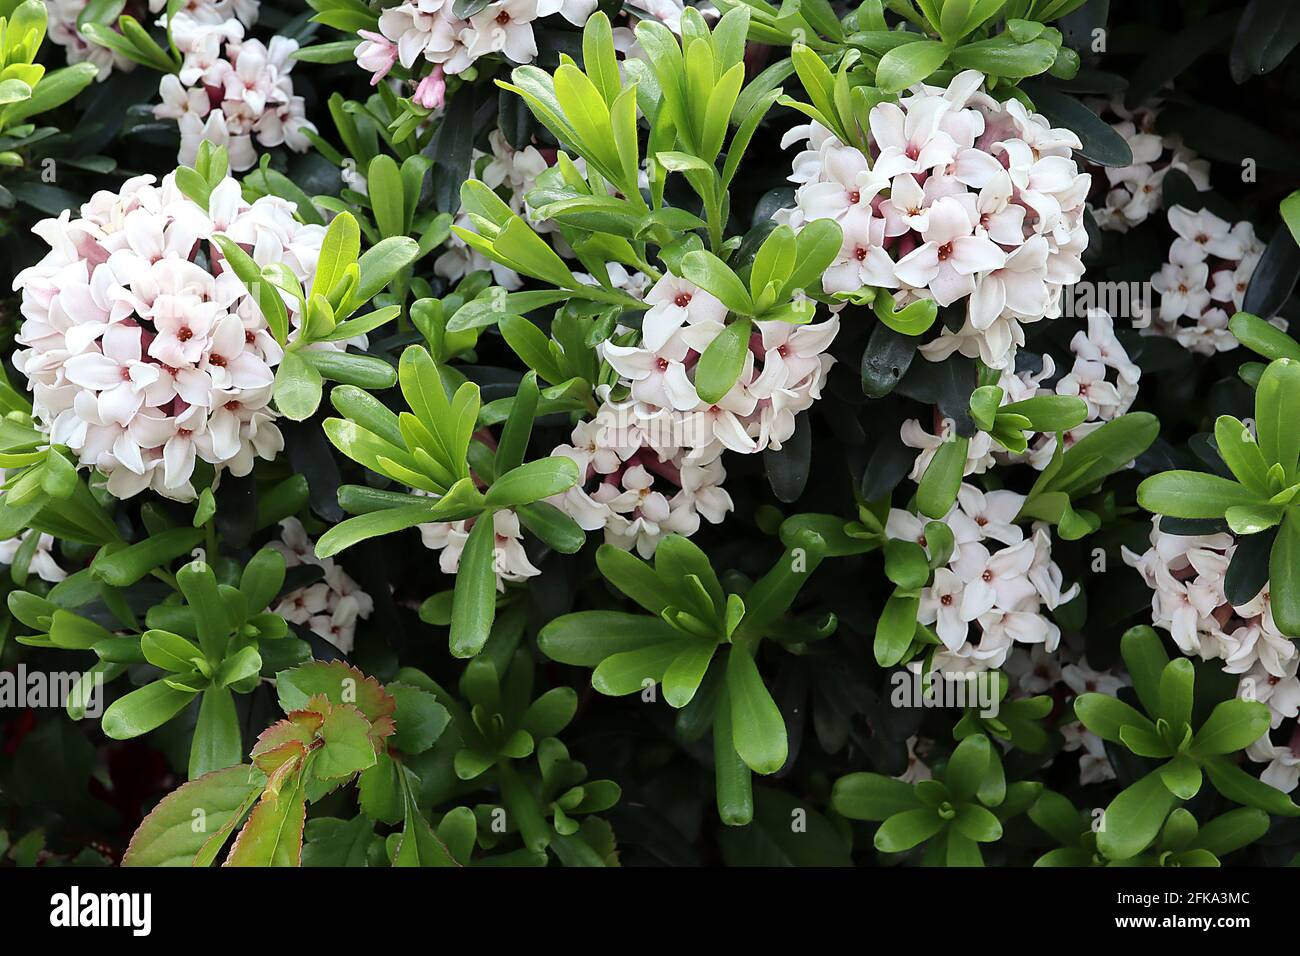 Daphne Eternal Fragrance High Resolution Stock Photography And Images Alamy